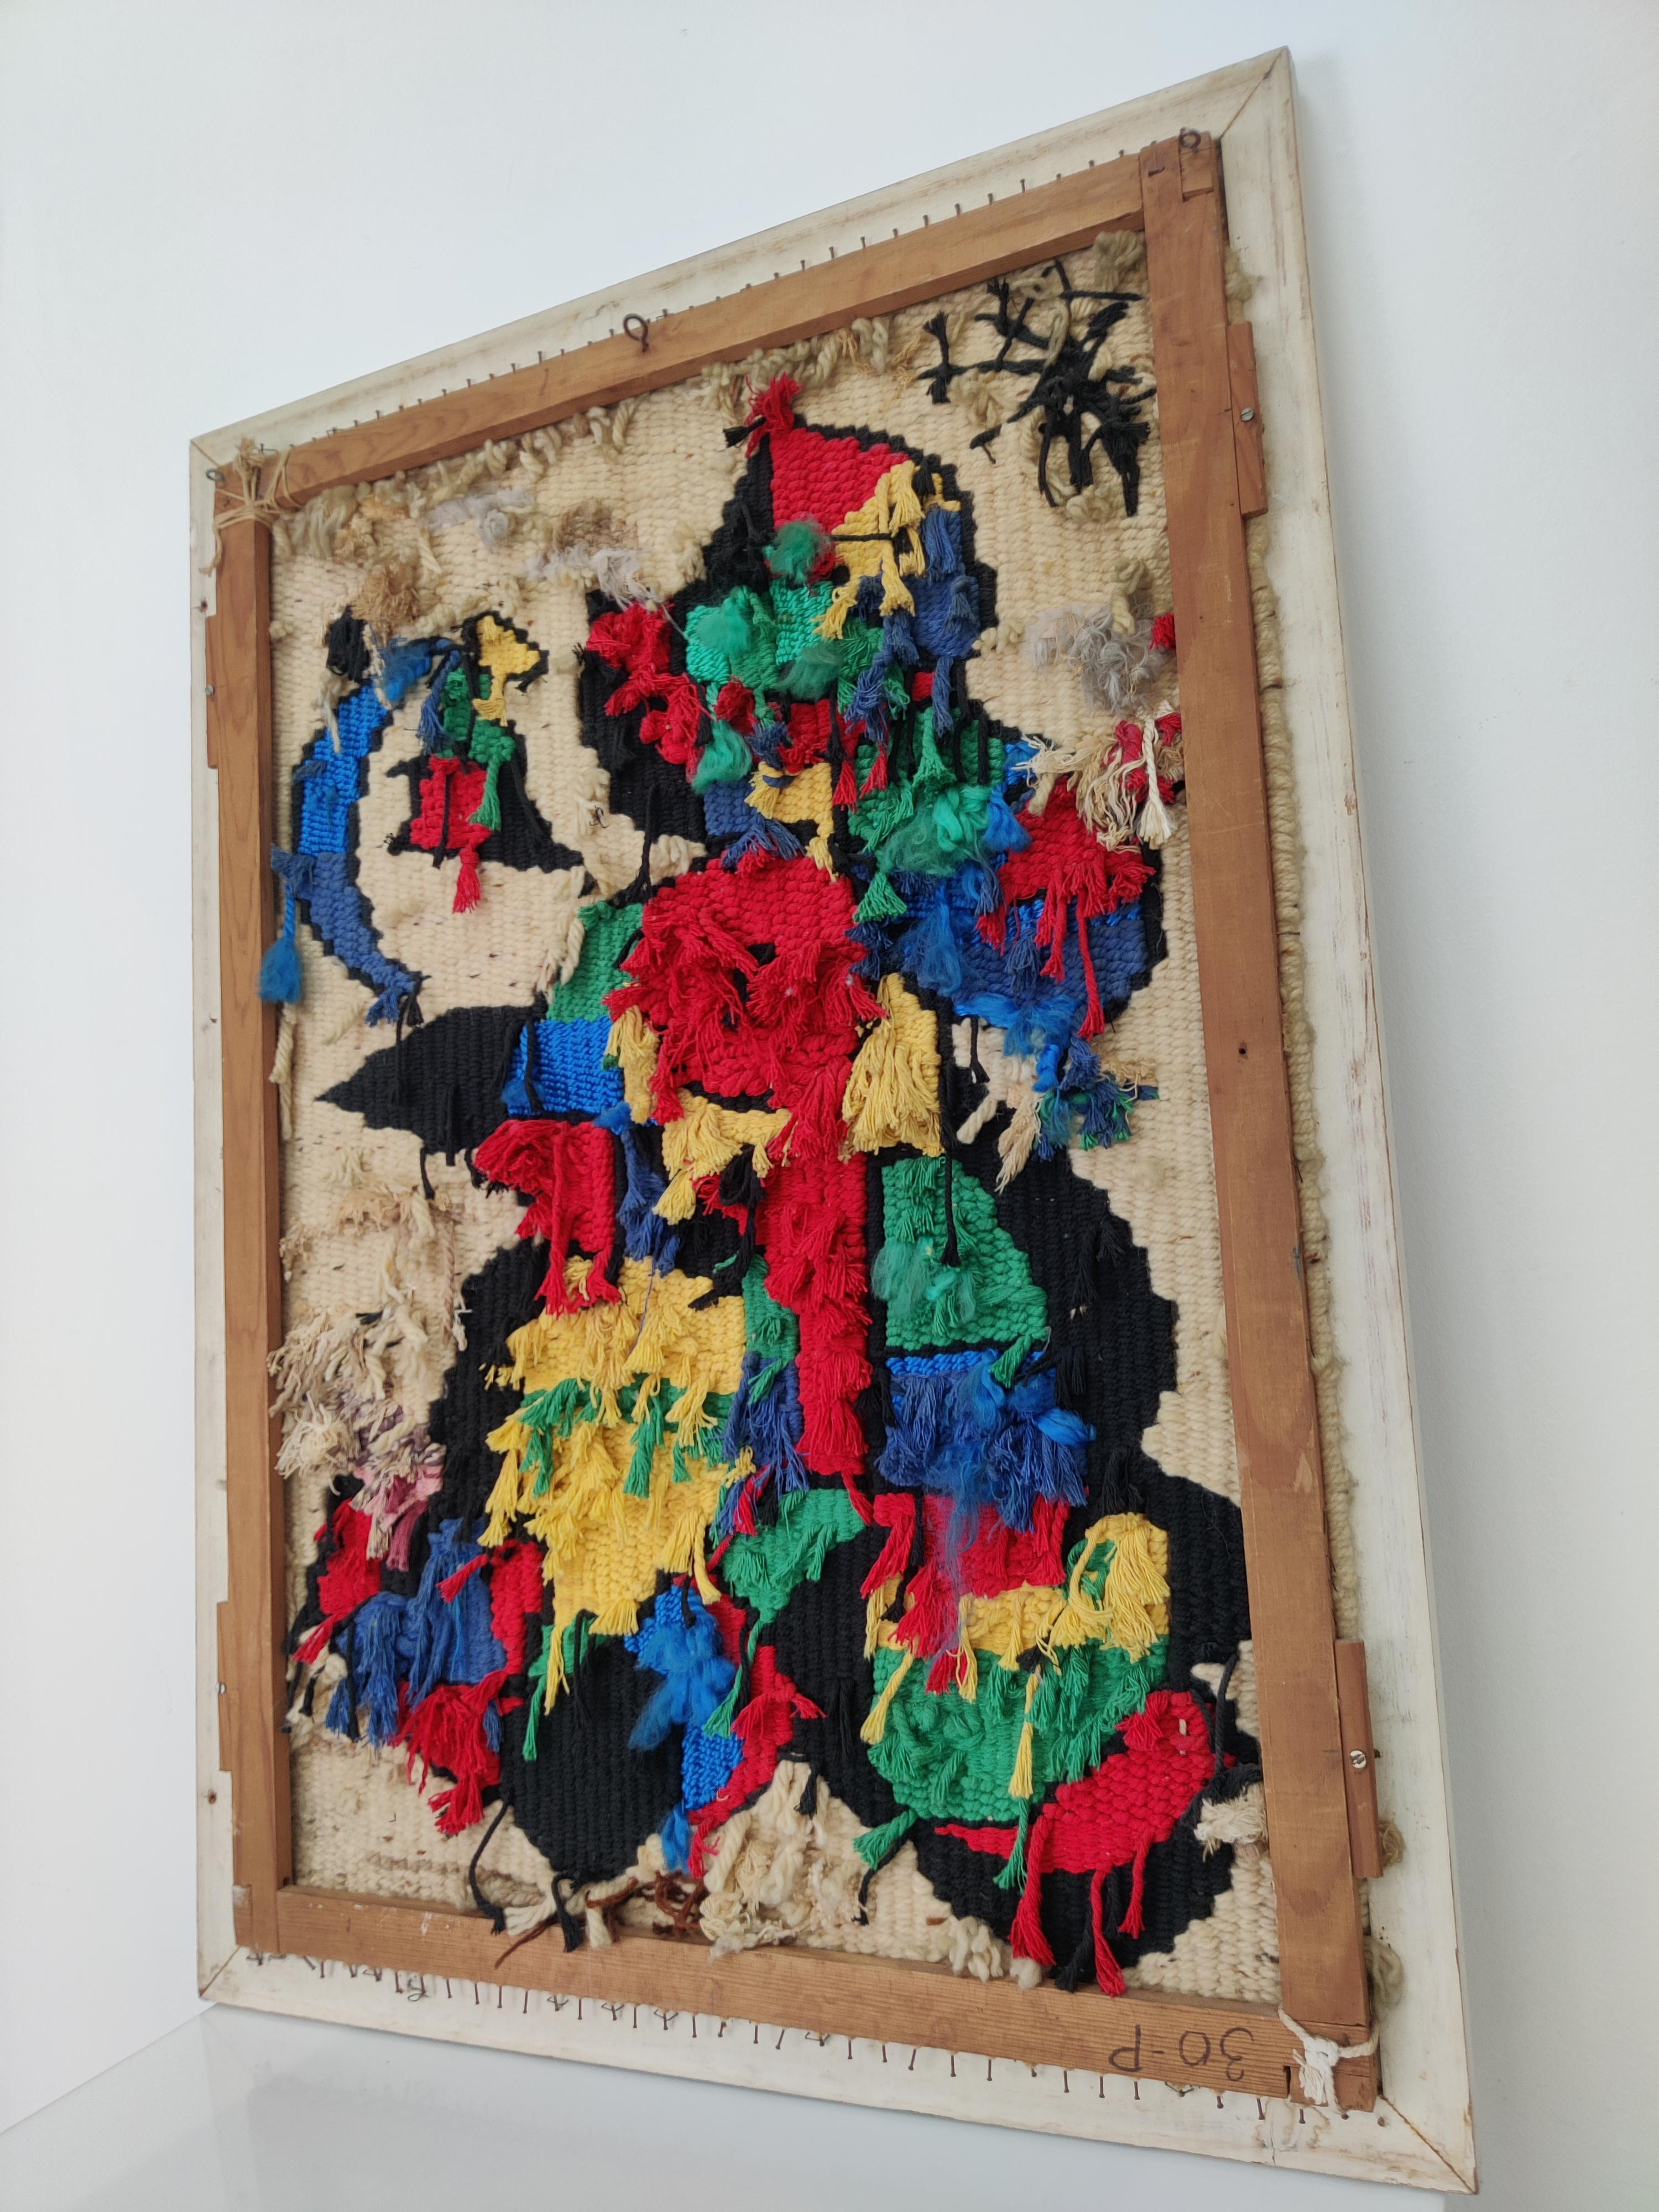 Fantastic tapestry woven by hand according to the extraordinary work carried out by Joan Miró and Josep Royo in the 70s. A wonderful piece that transmits all the strength, color and textures of the tapestry thanks to the vibrant work of the artist.